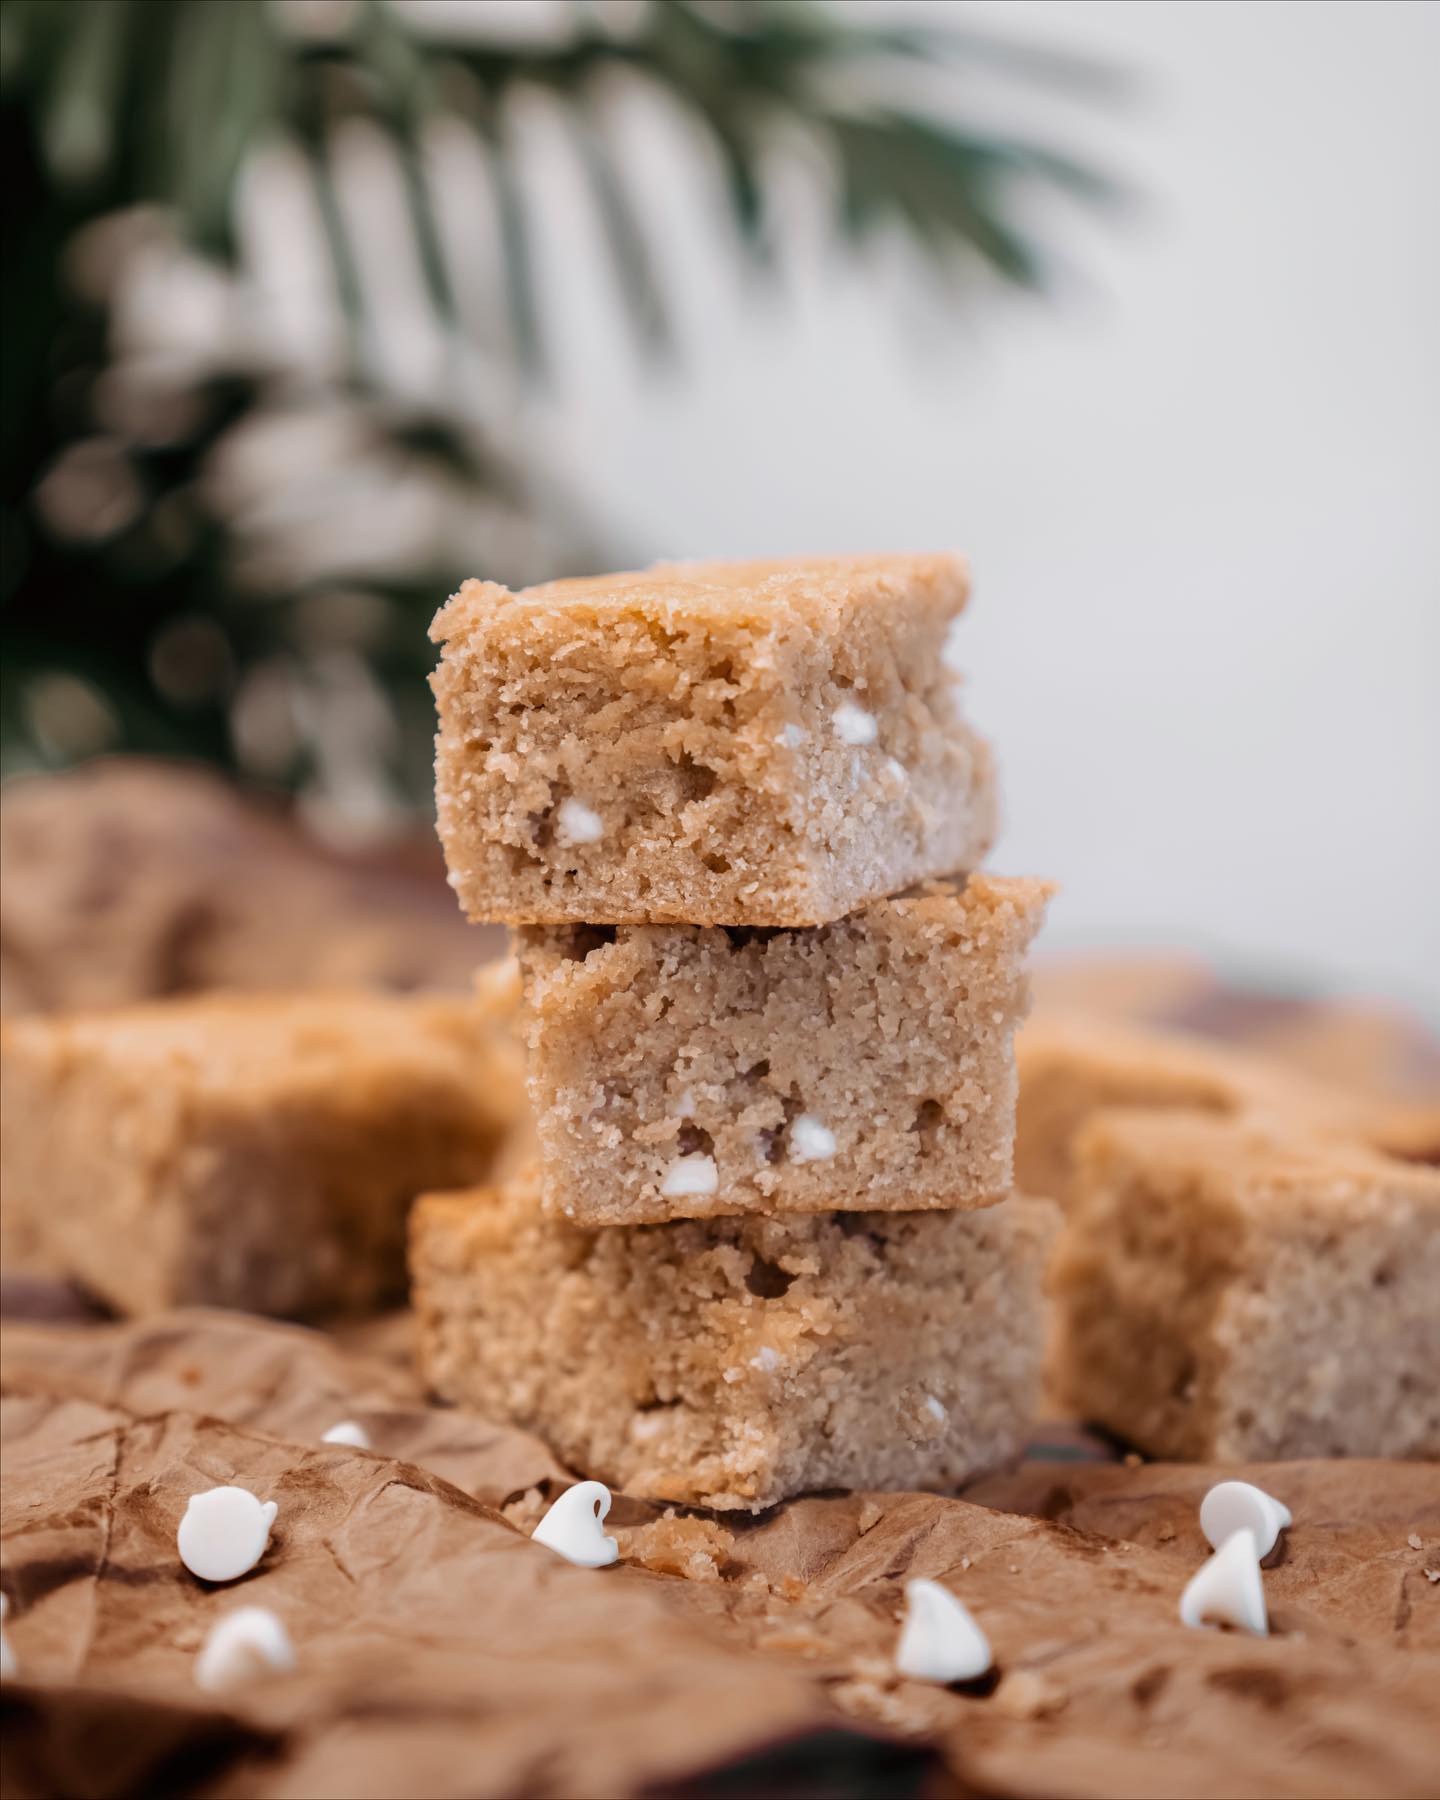 easy white chocolate blondies recipe for #nationalblondebrownieday 👩‍🍳✨

ingredients from @foodlandhi:
- 1 cup unsalted butter
- 1 1/2 cups Maika'i brown sugar
- 2 tsp vanilla extract
- 1 3/4 cups all purpose flour
- 1/2 tsp baking powder
- 1/2 tsp salt
- 2 eggs

preheat oven to 350 degrees and spray pan with cooing spray | mix melted butter and brown sugar | add eggs and vanilla extract | add flour, baking powder, and salt | pour the batter into the pan | bake for 25-30 minutes or until golden - enjoy! 

#AMaikaiDay #FoodlandHi